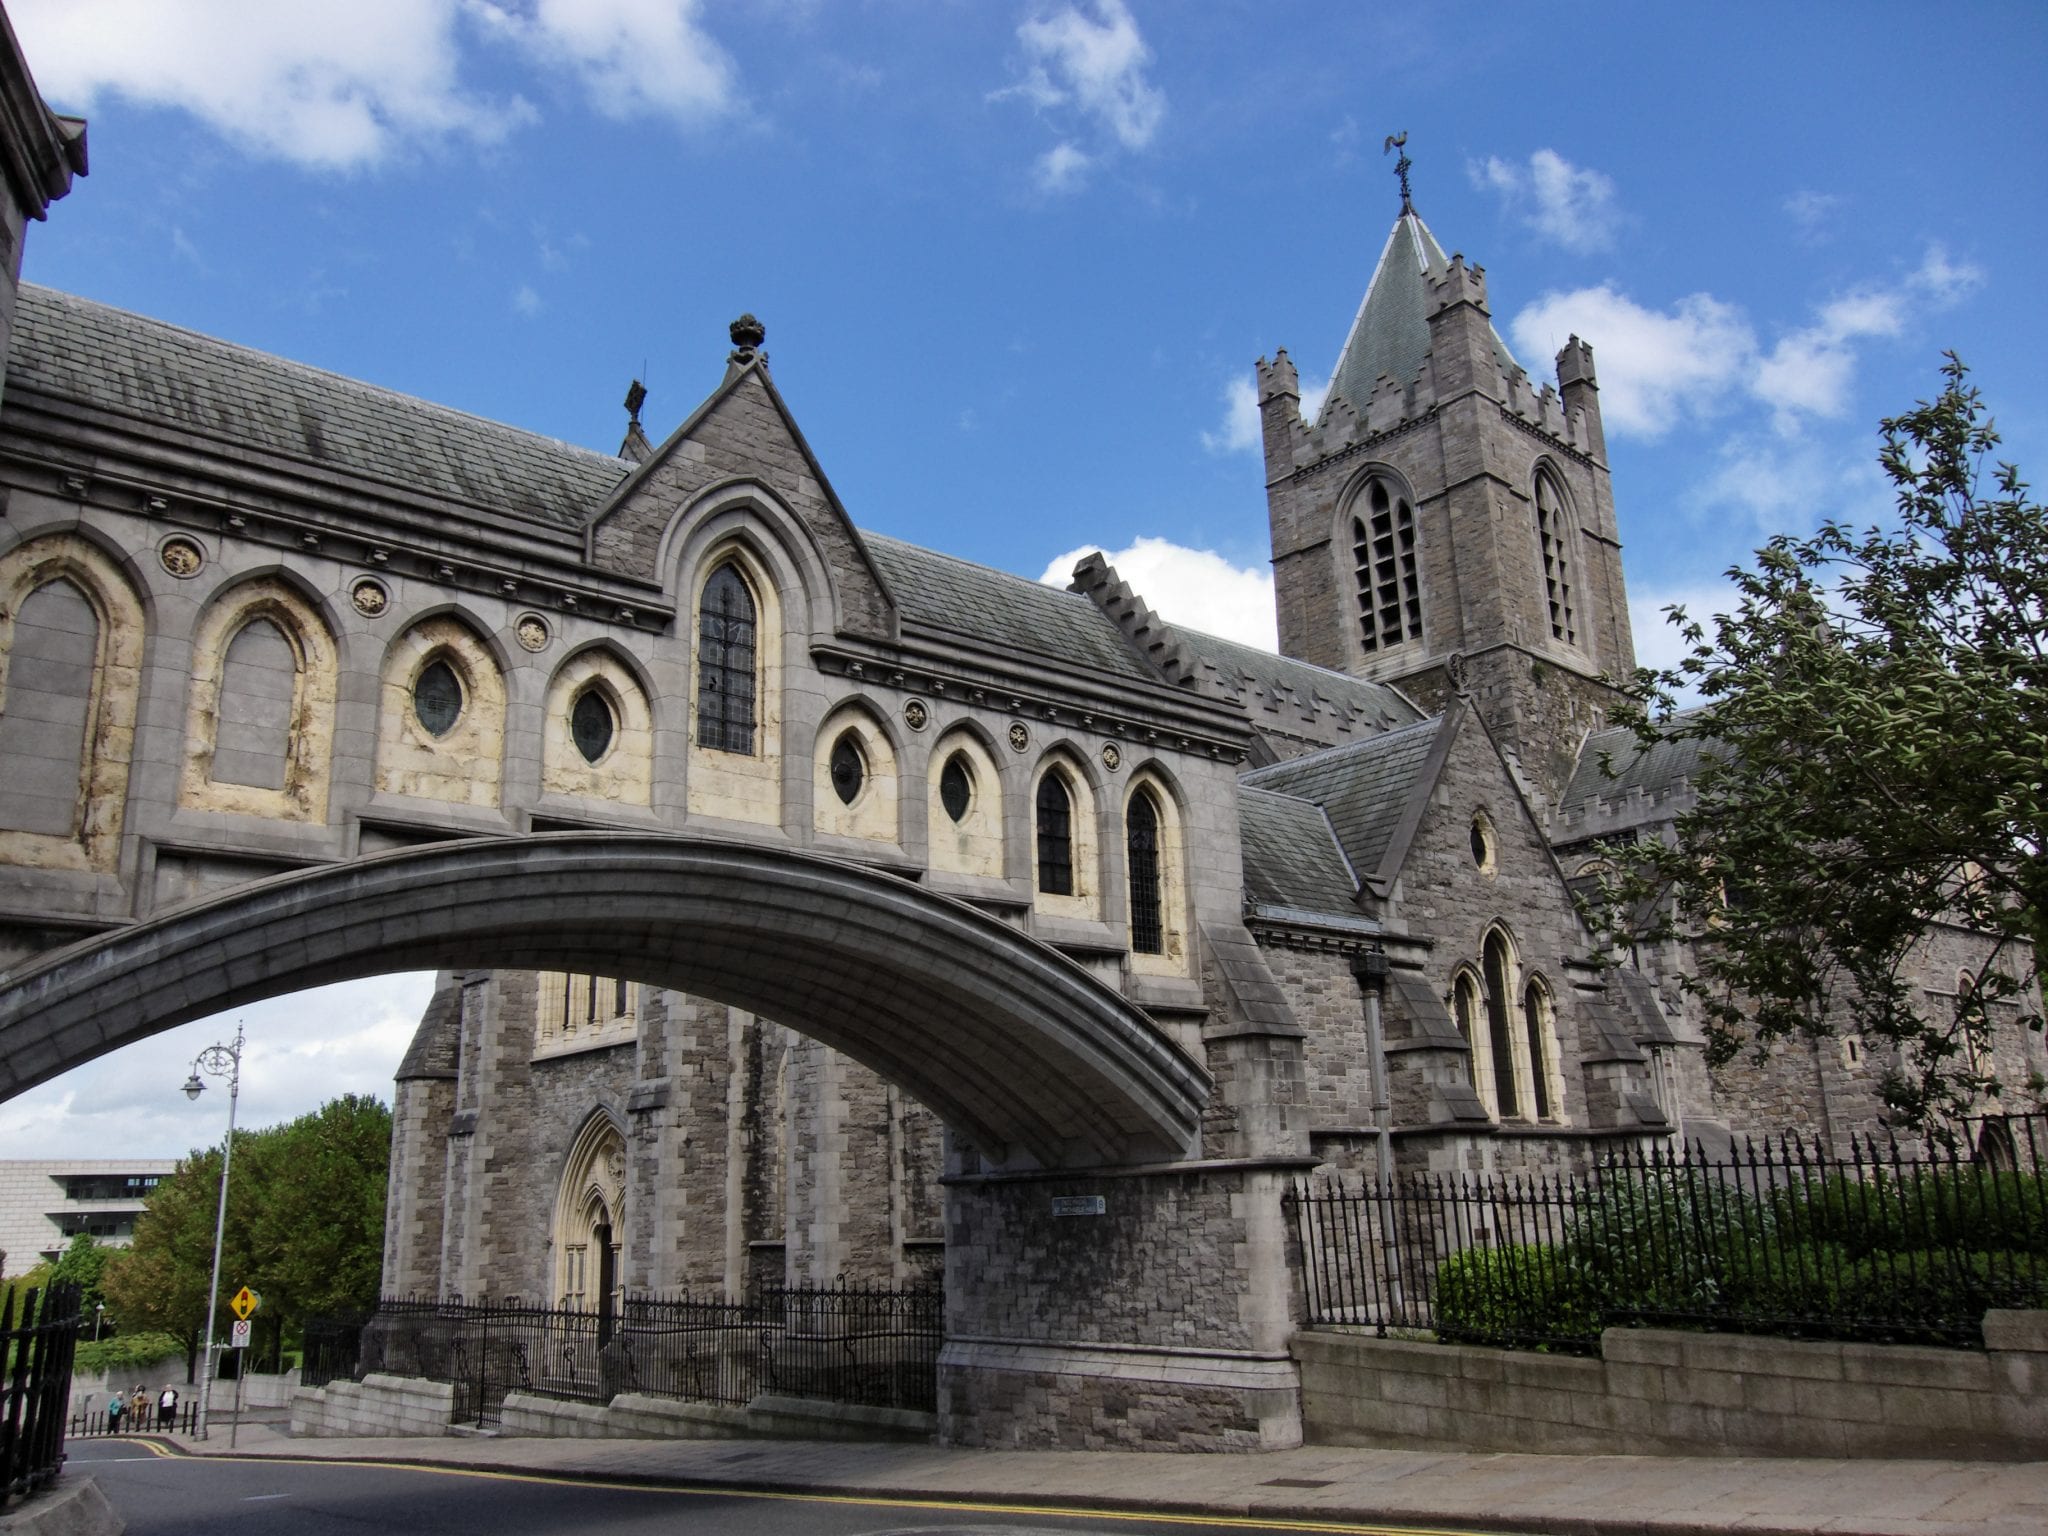 The exterior view of the Christ Church Cathedral